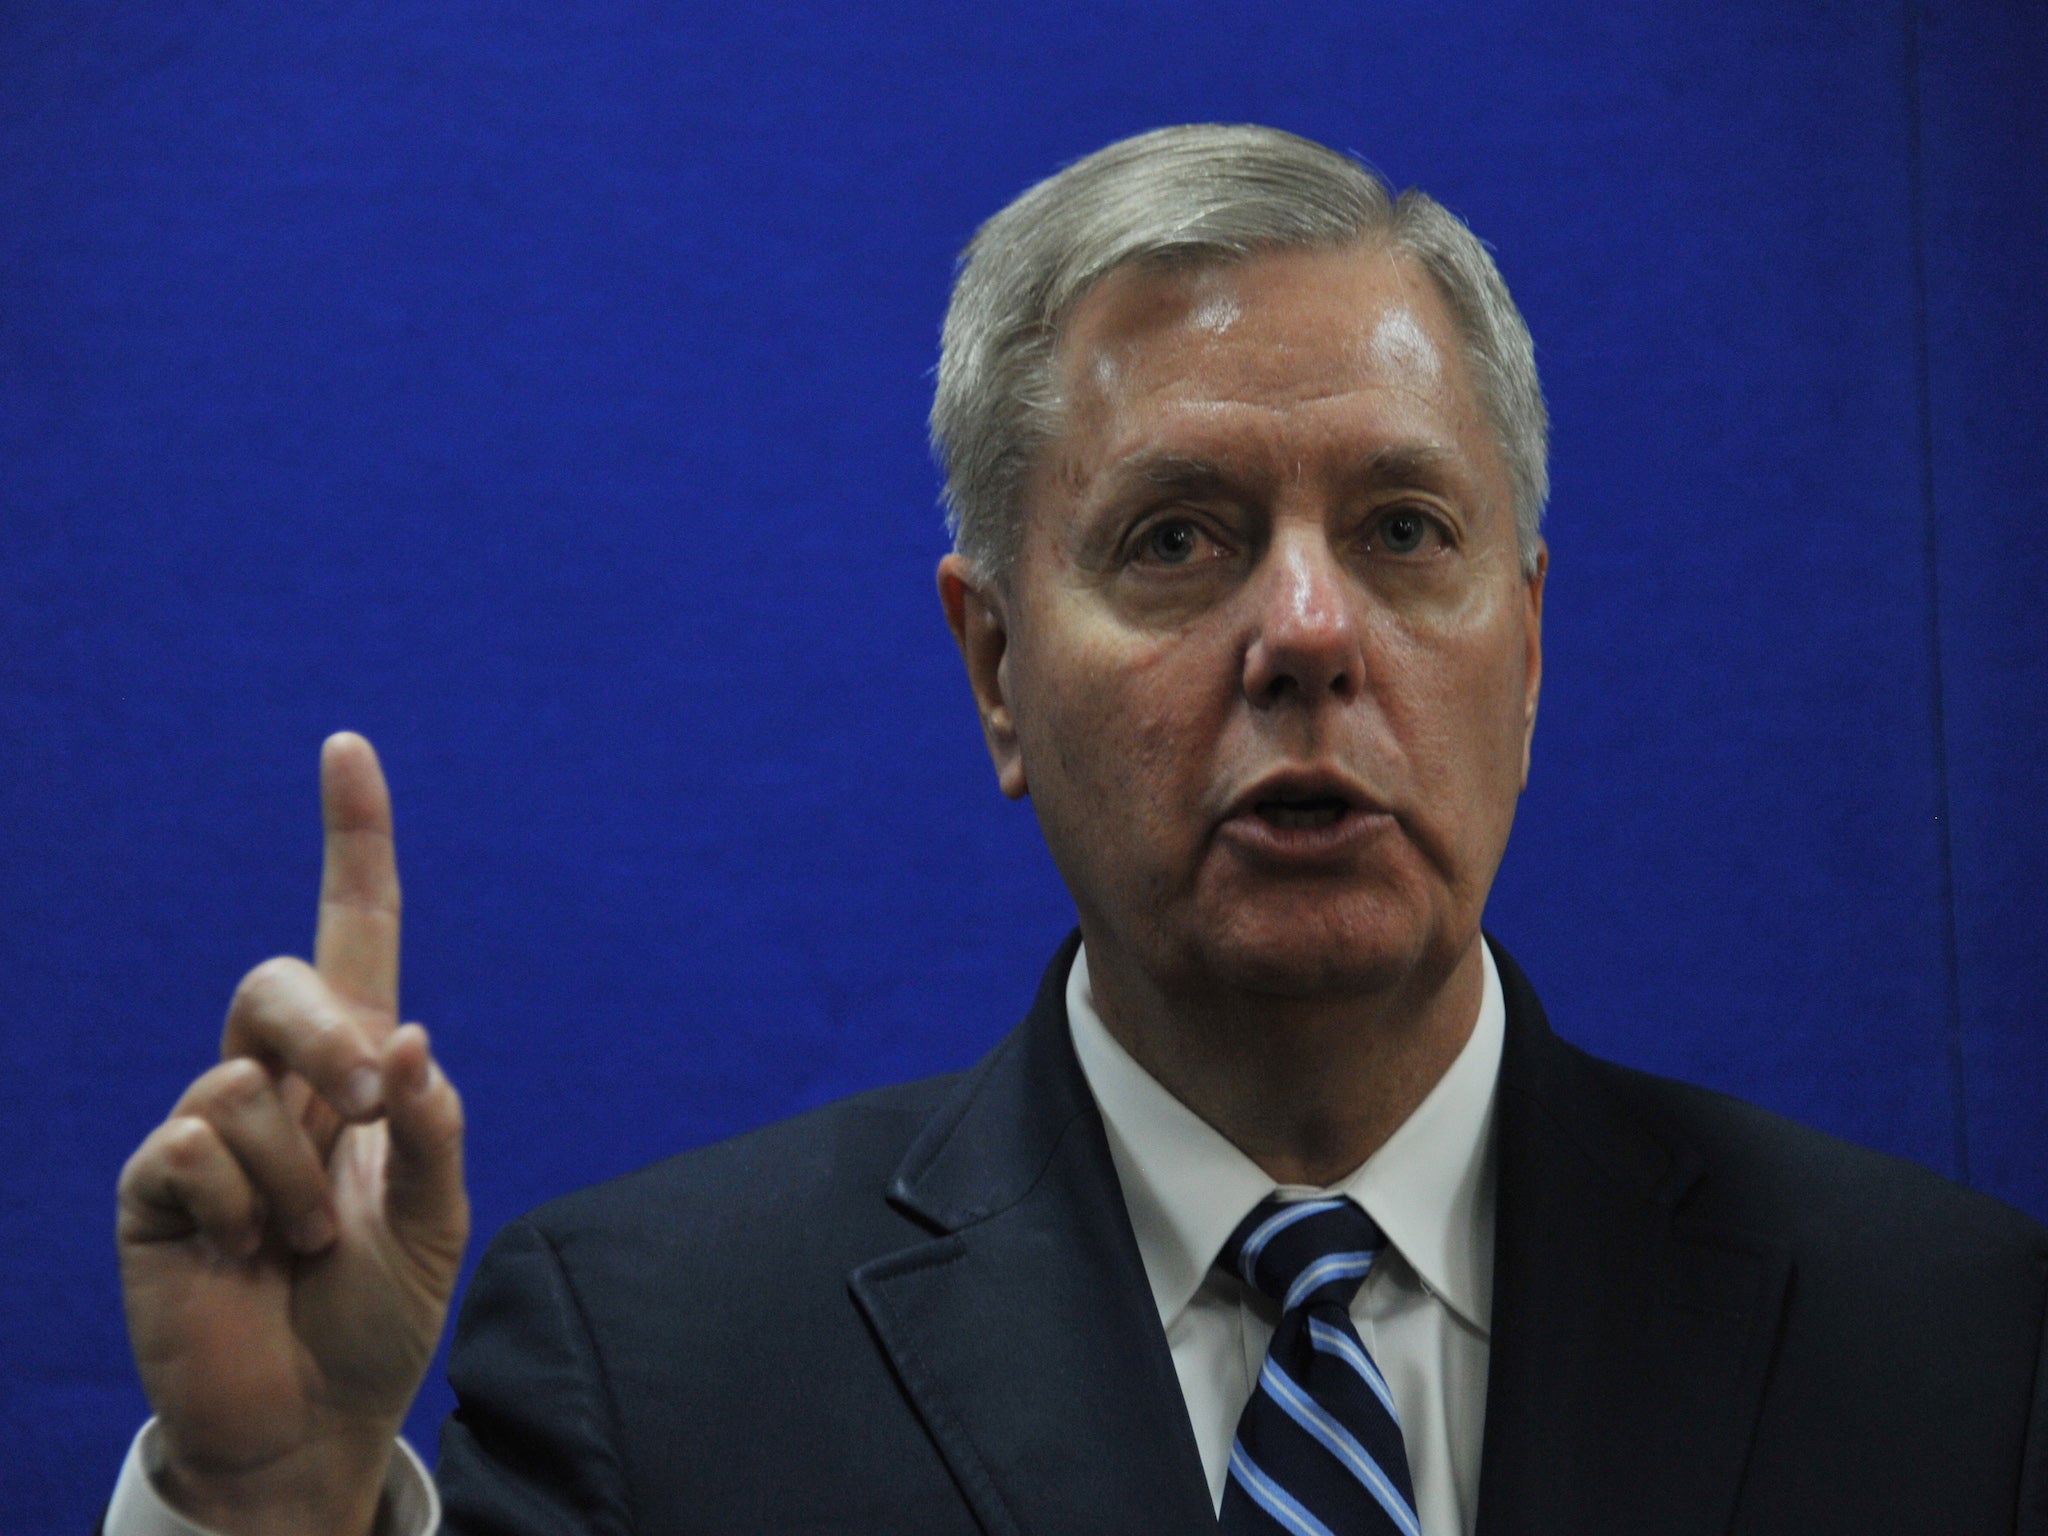 Senator Lindsey Graham says he has never used email